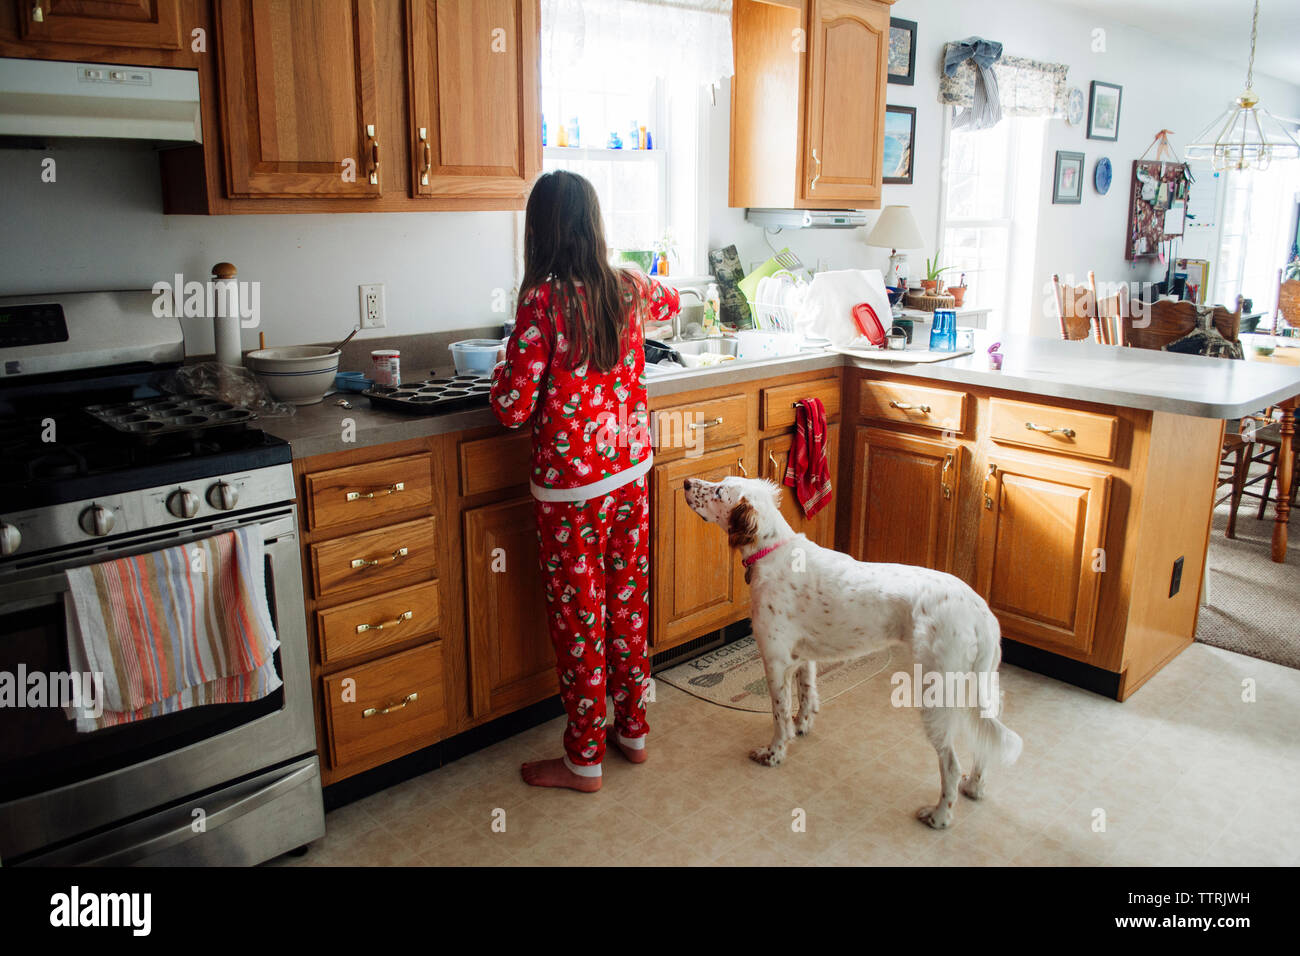 Rear view of girl preparing food while standing by dog in kitchen Stock Photo